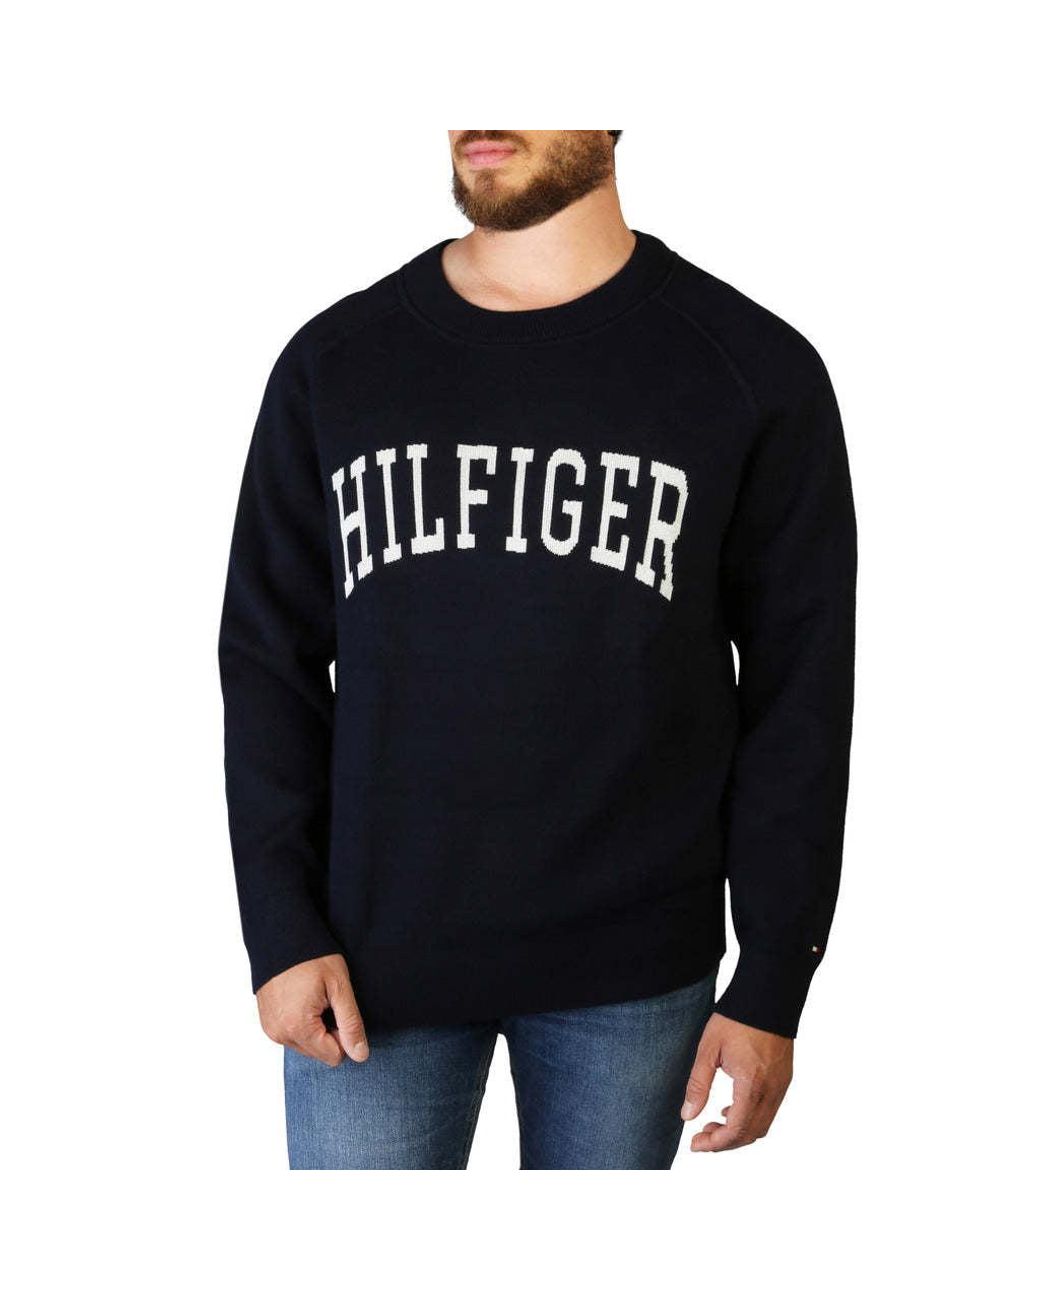 Tommy Hilfiger Sweaters - Mw0mw25353 - Blue in Black for Men - Save 15% |  Lyst